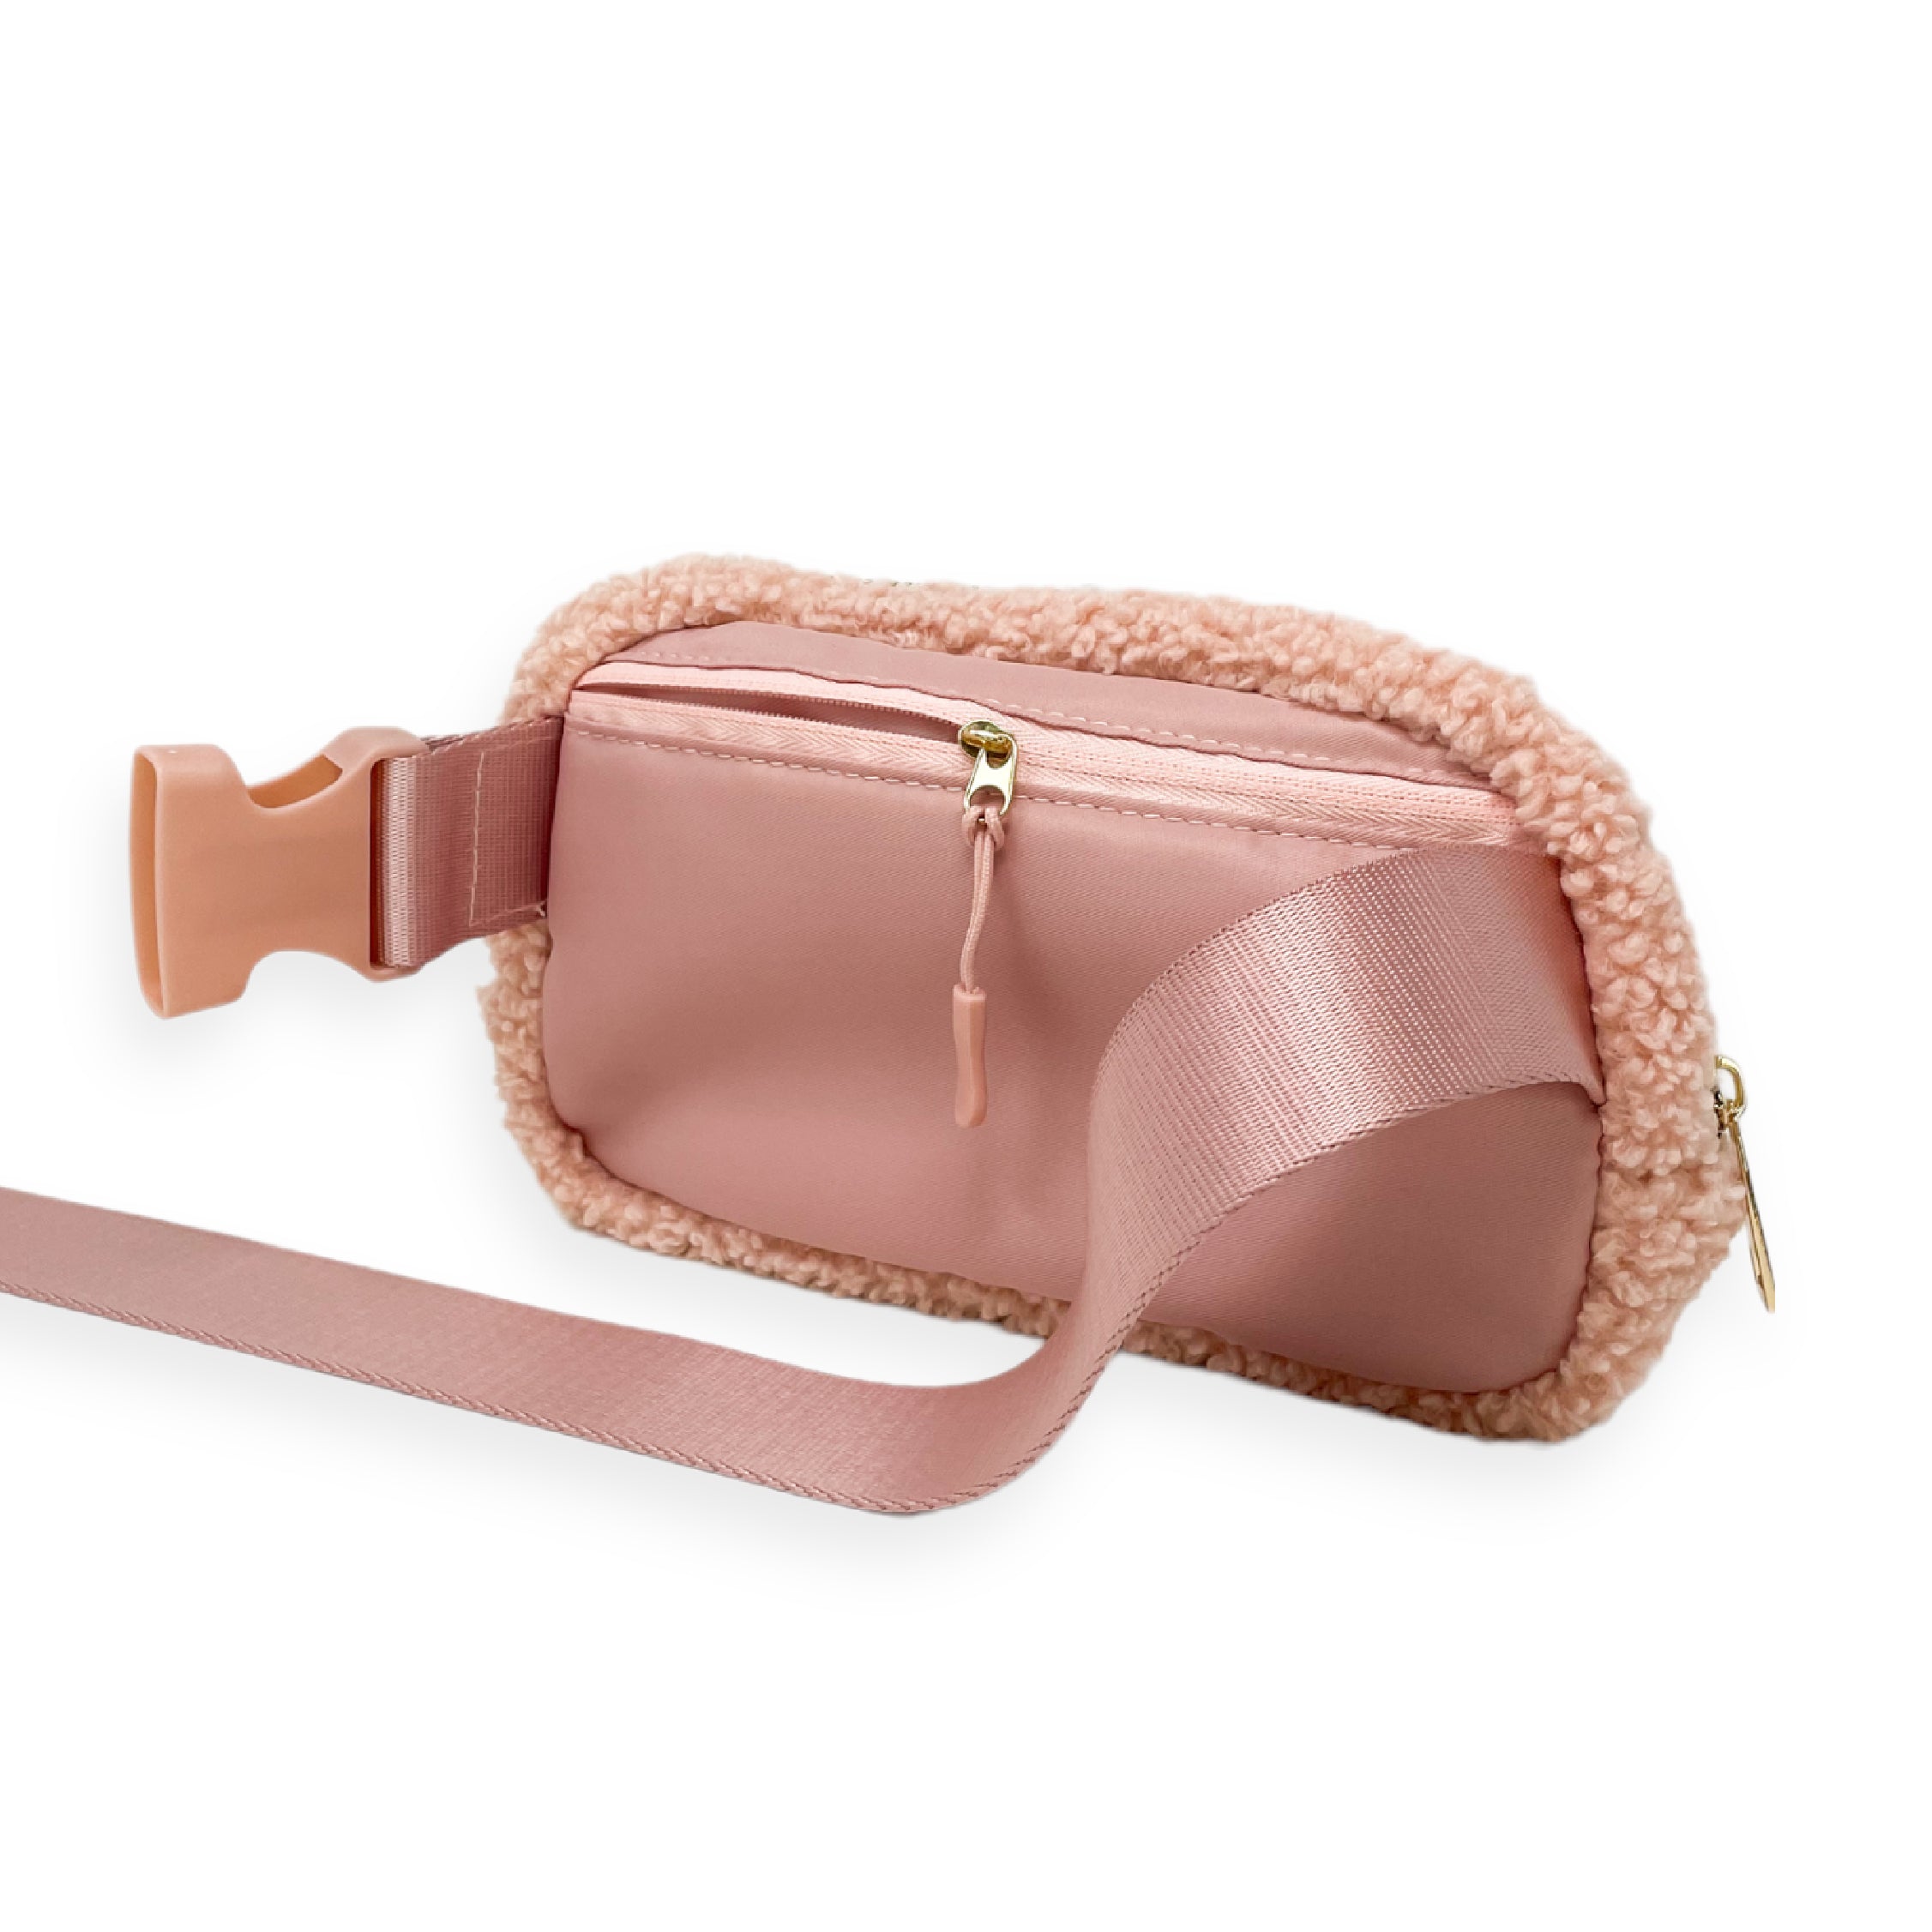 COZY All You Need Belt Bags - Blush, Cream, and Gray